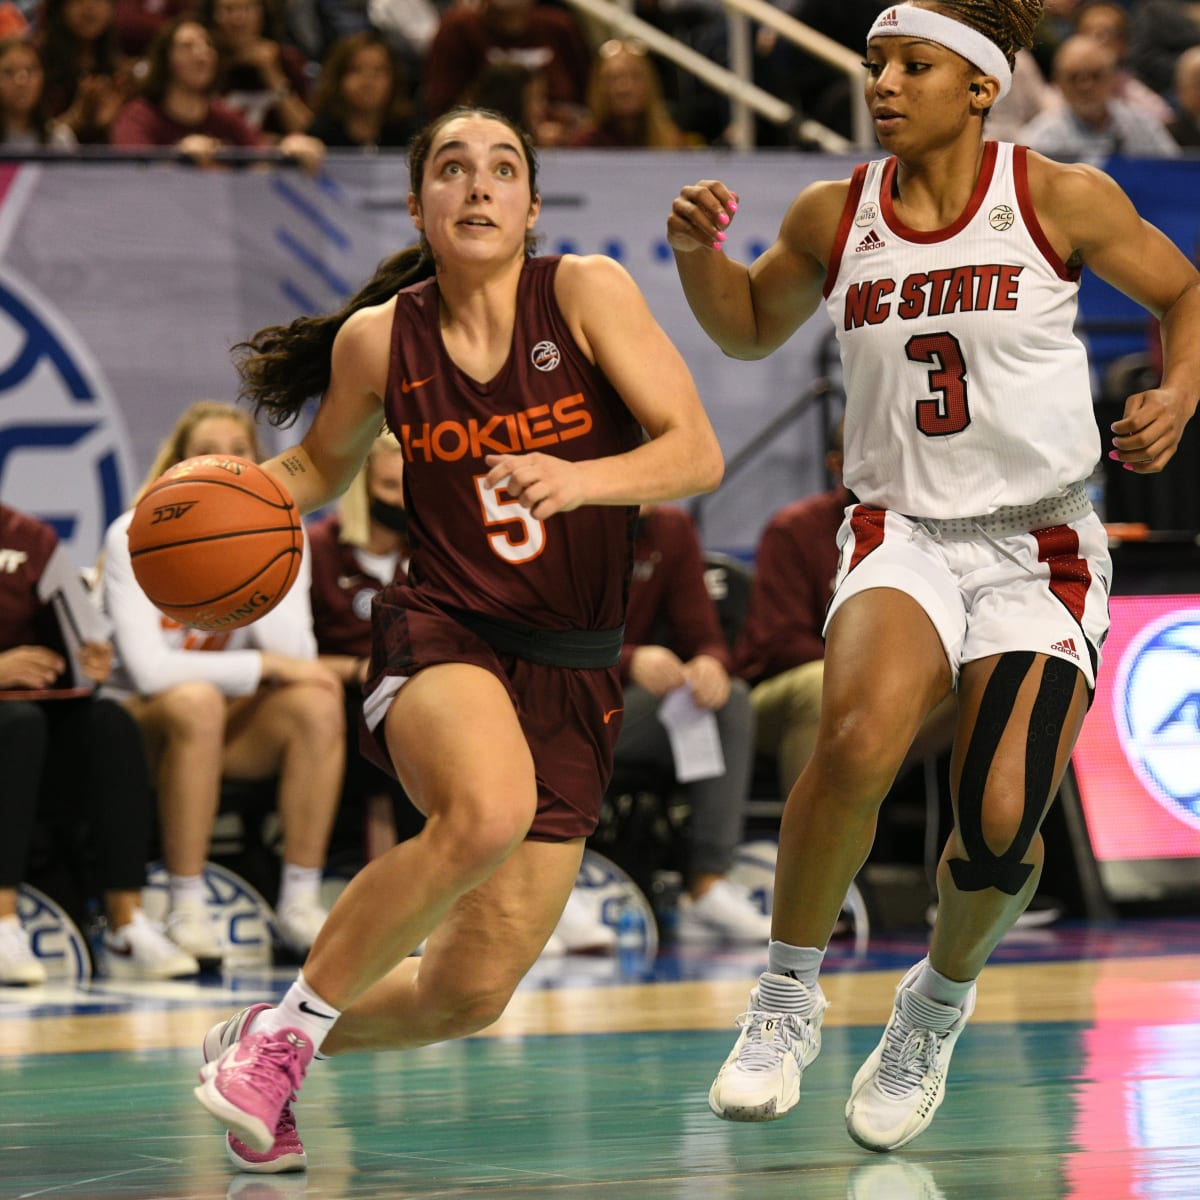 Virginia Tech at North Carolina Live Stream Women Basketball - How to Watch and Stream Major League and College Sports